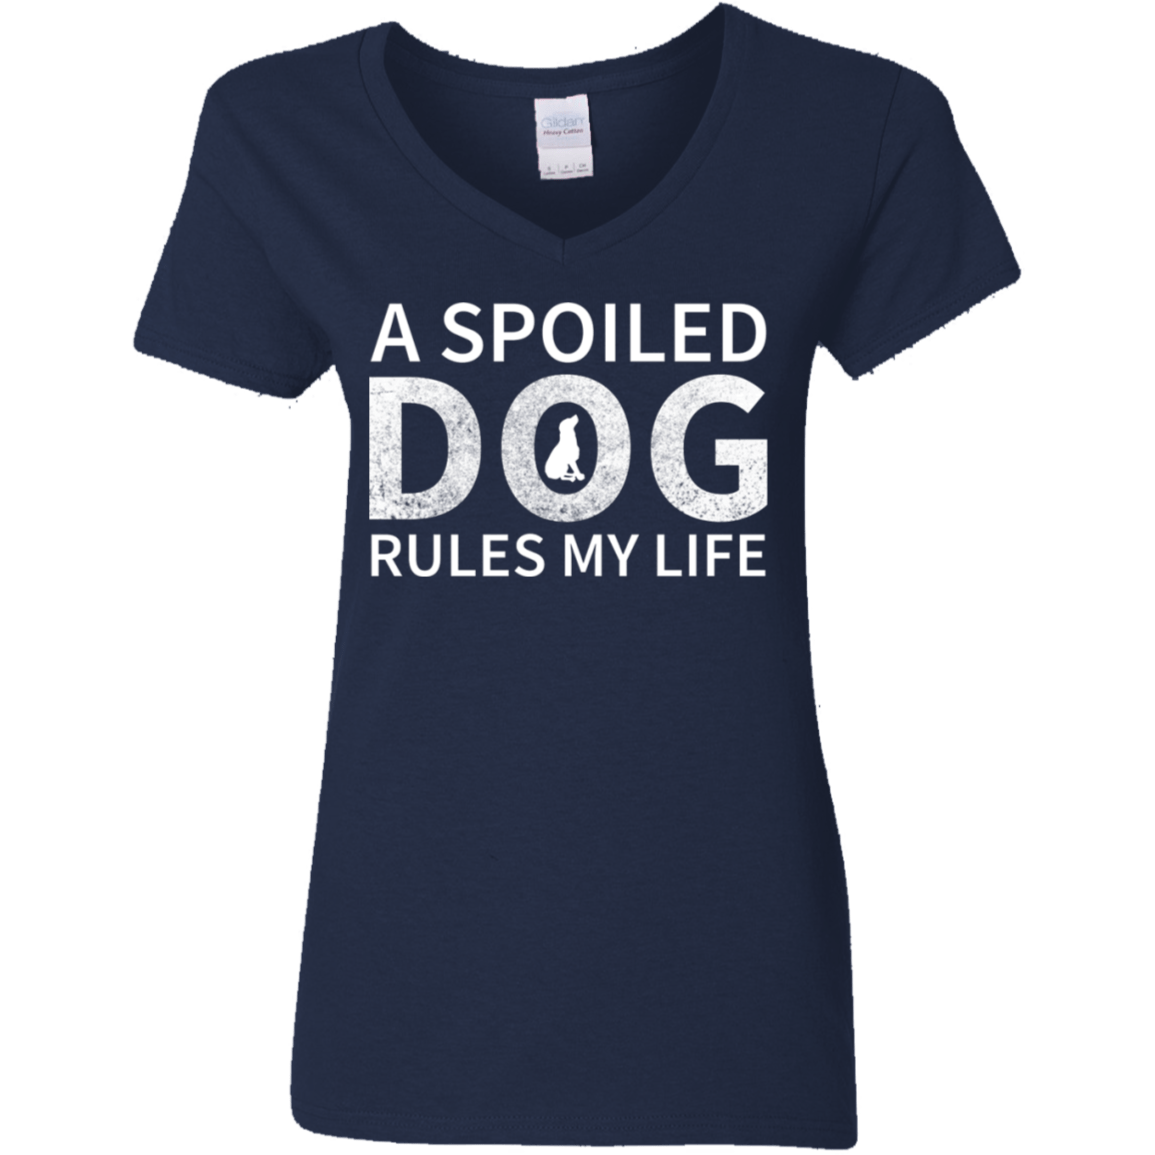 A Spoiled Dog Rules My Life - Ladies V Neck.